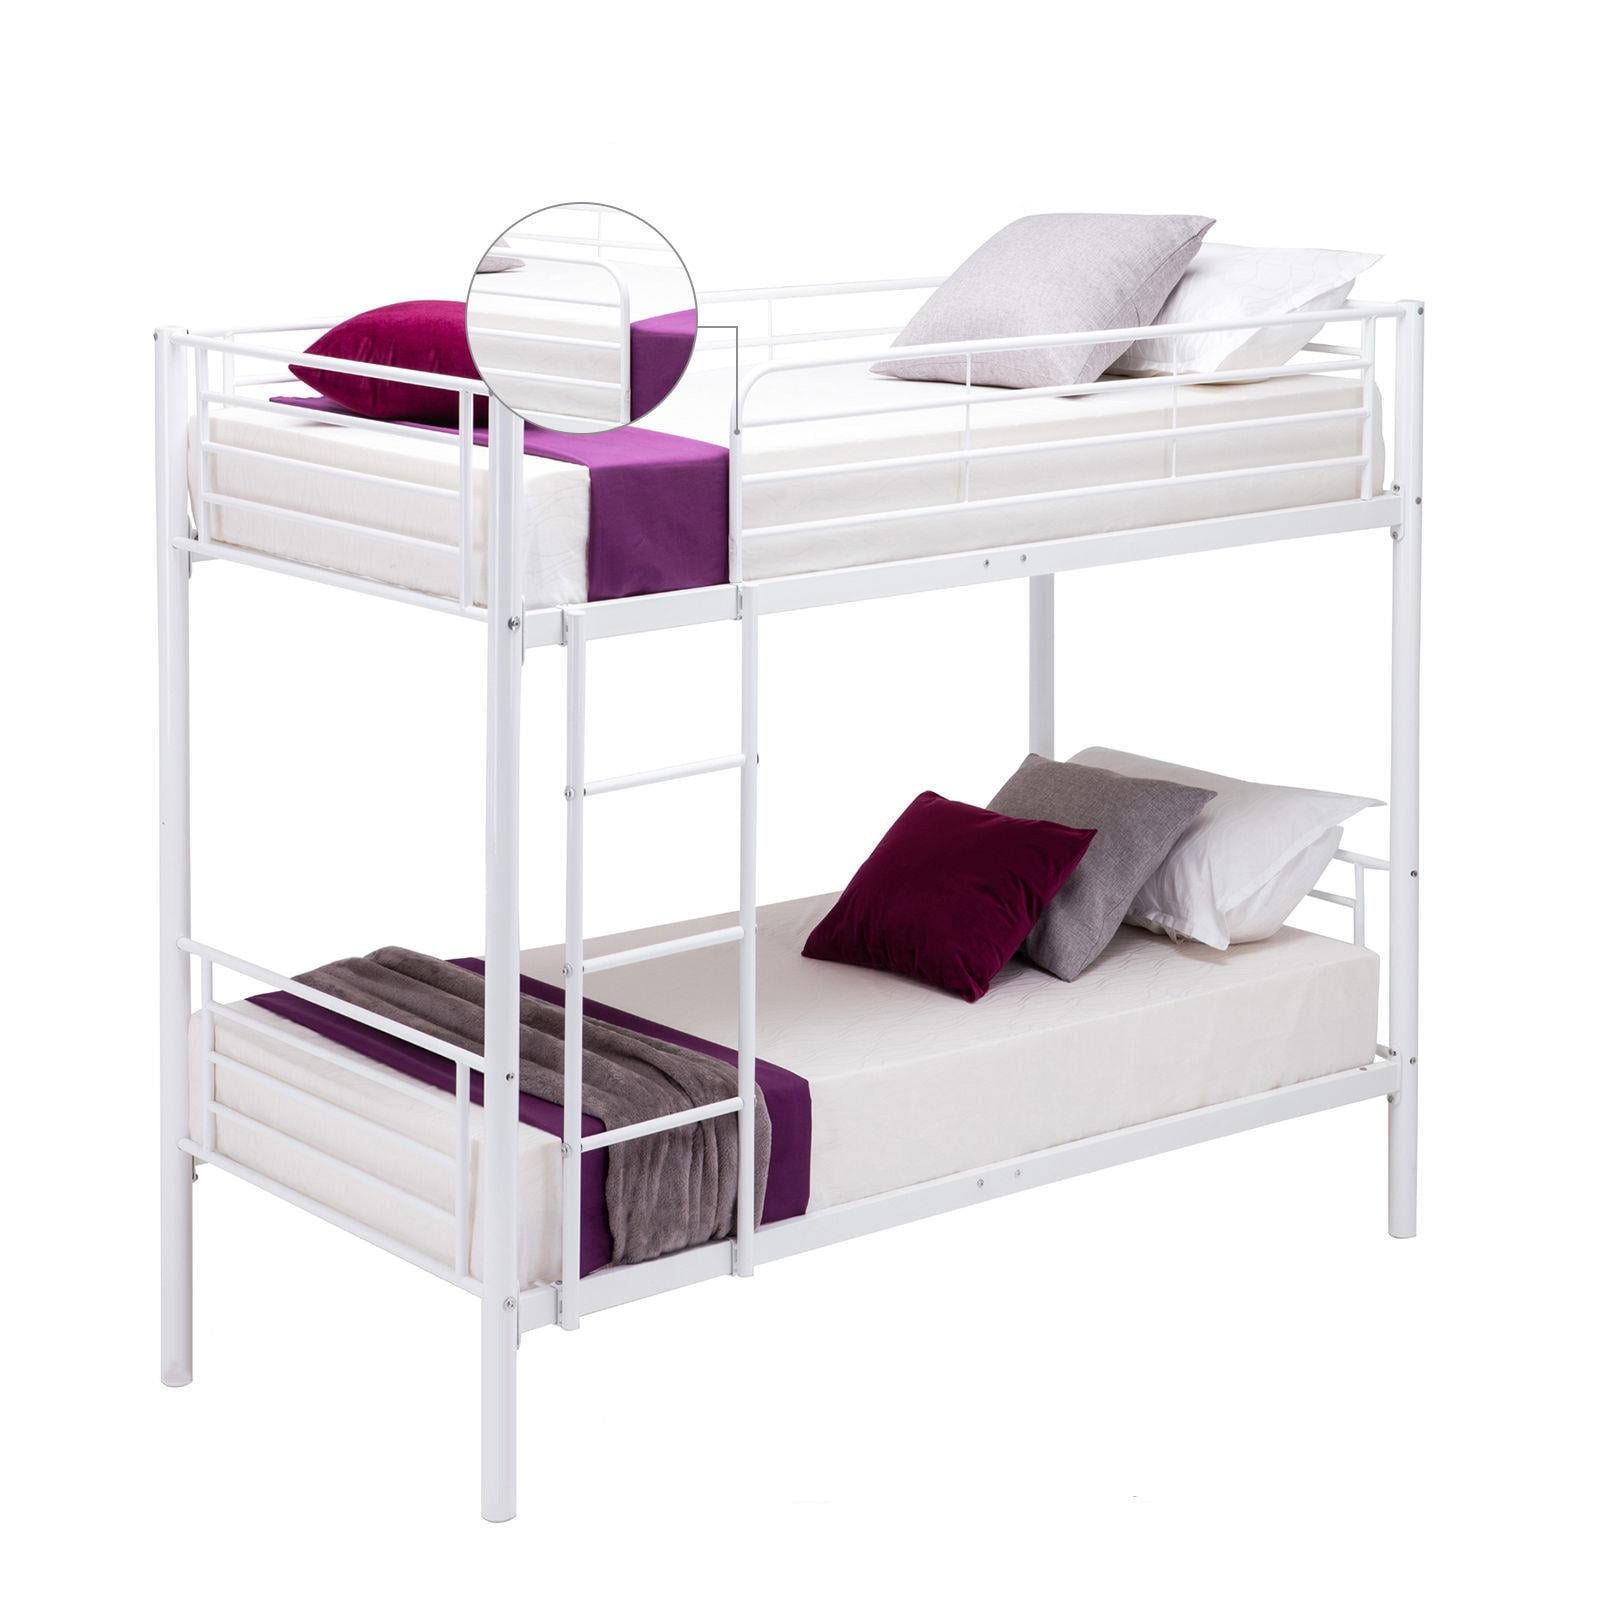 Ktaxon Modern Metal Twin Over Bunk, Bunk Beds With Ladder On Left